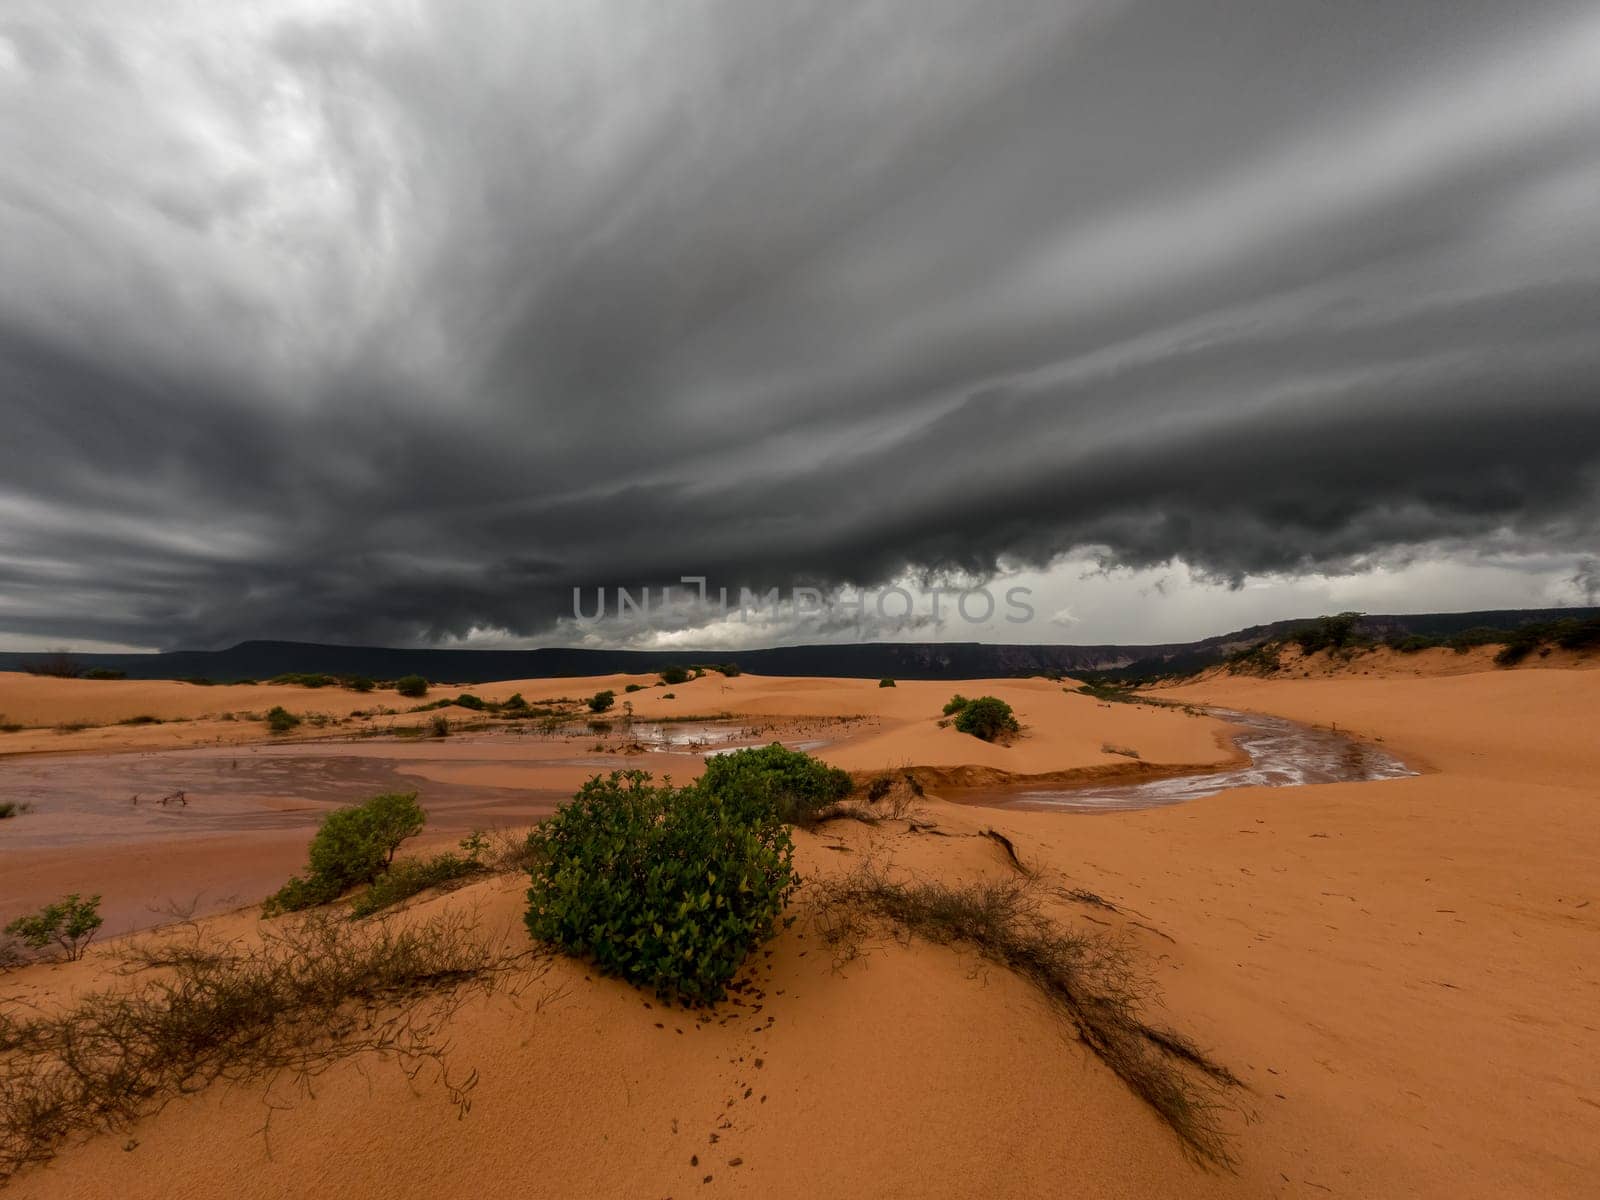 A massive tropical storm approaches the Jalapao sand dunes, creating an impressive and dramatic scene with dark clouds and a stunning sunset.